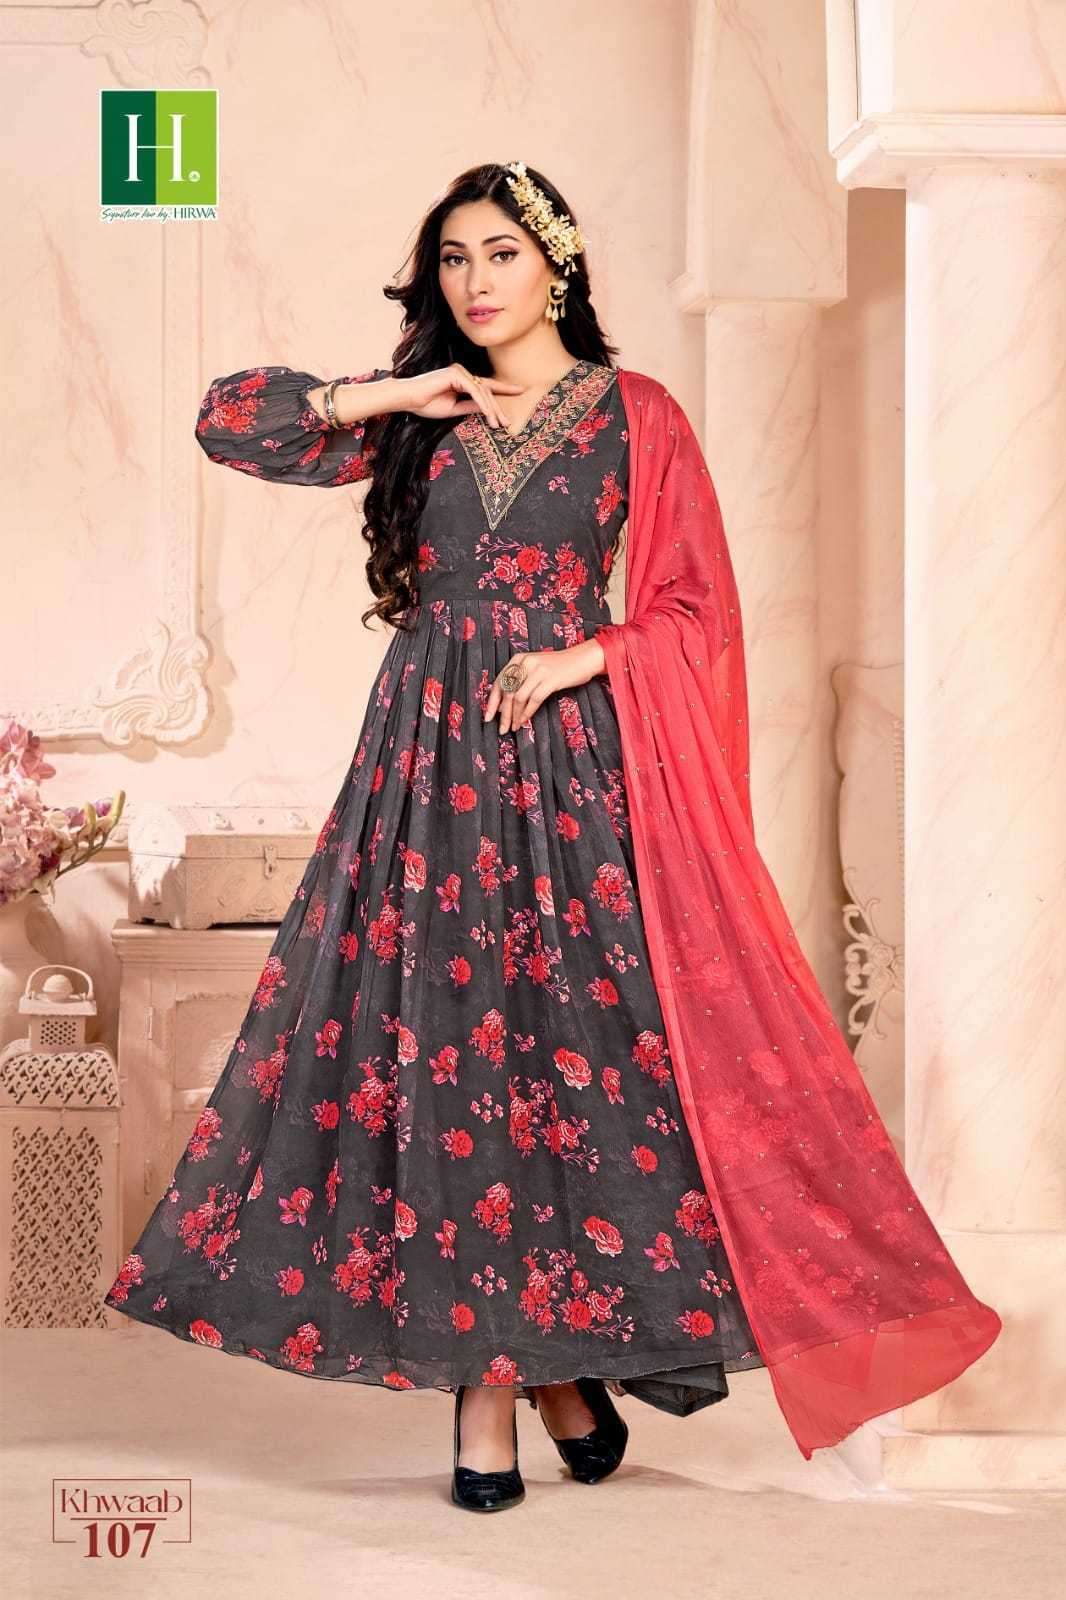 KHWAAB SERIES 101 TO 108 BY HIRWA DESIGNER WITH PRINTED GEORGETTE GOWN WITH DUPATTA ARE AVAILABLE AT WHOLESALE PRICE